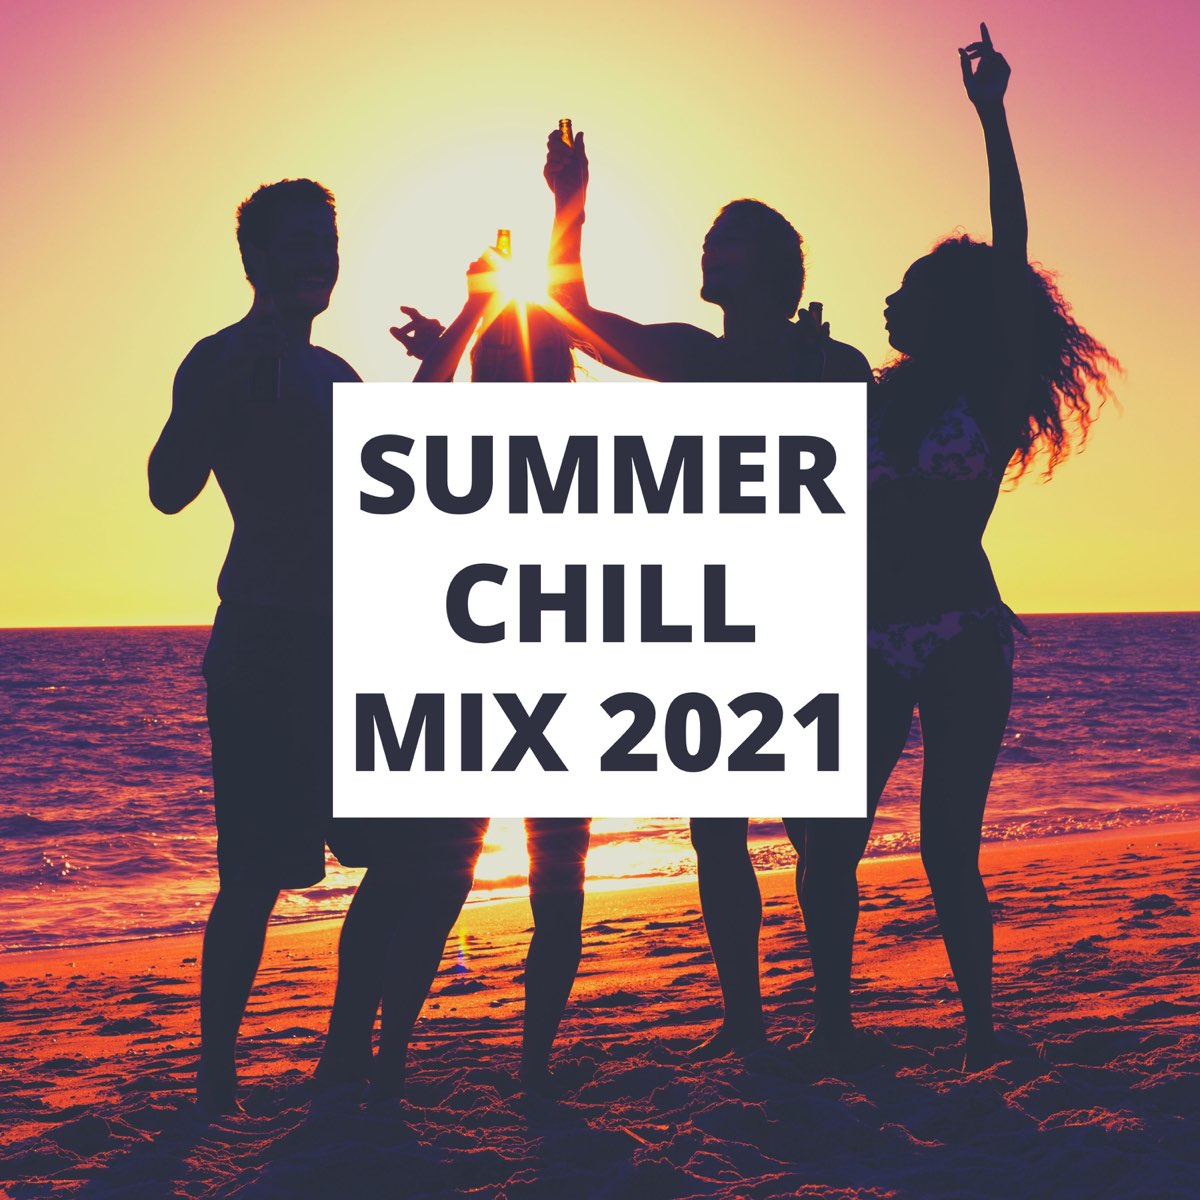 Summer Chill Mix 2021 - Chill Music Summer Vibes, Beach Music by Ibiza del Mar on Apple Music